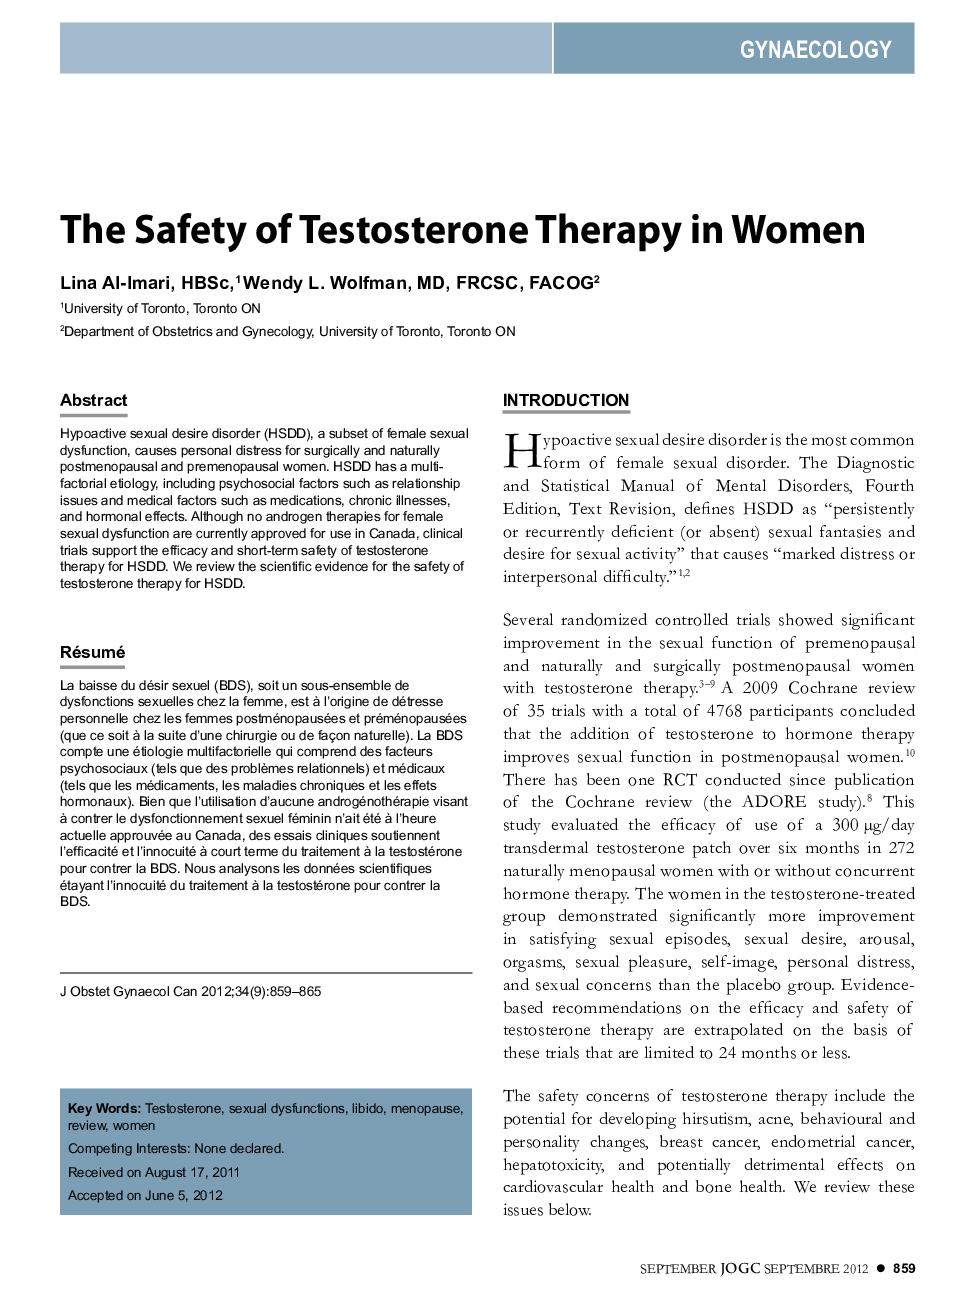 The Safety of Testosterone Therapy in Women